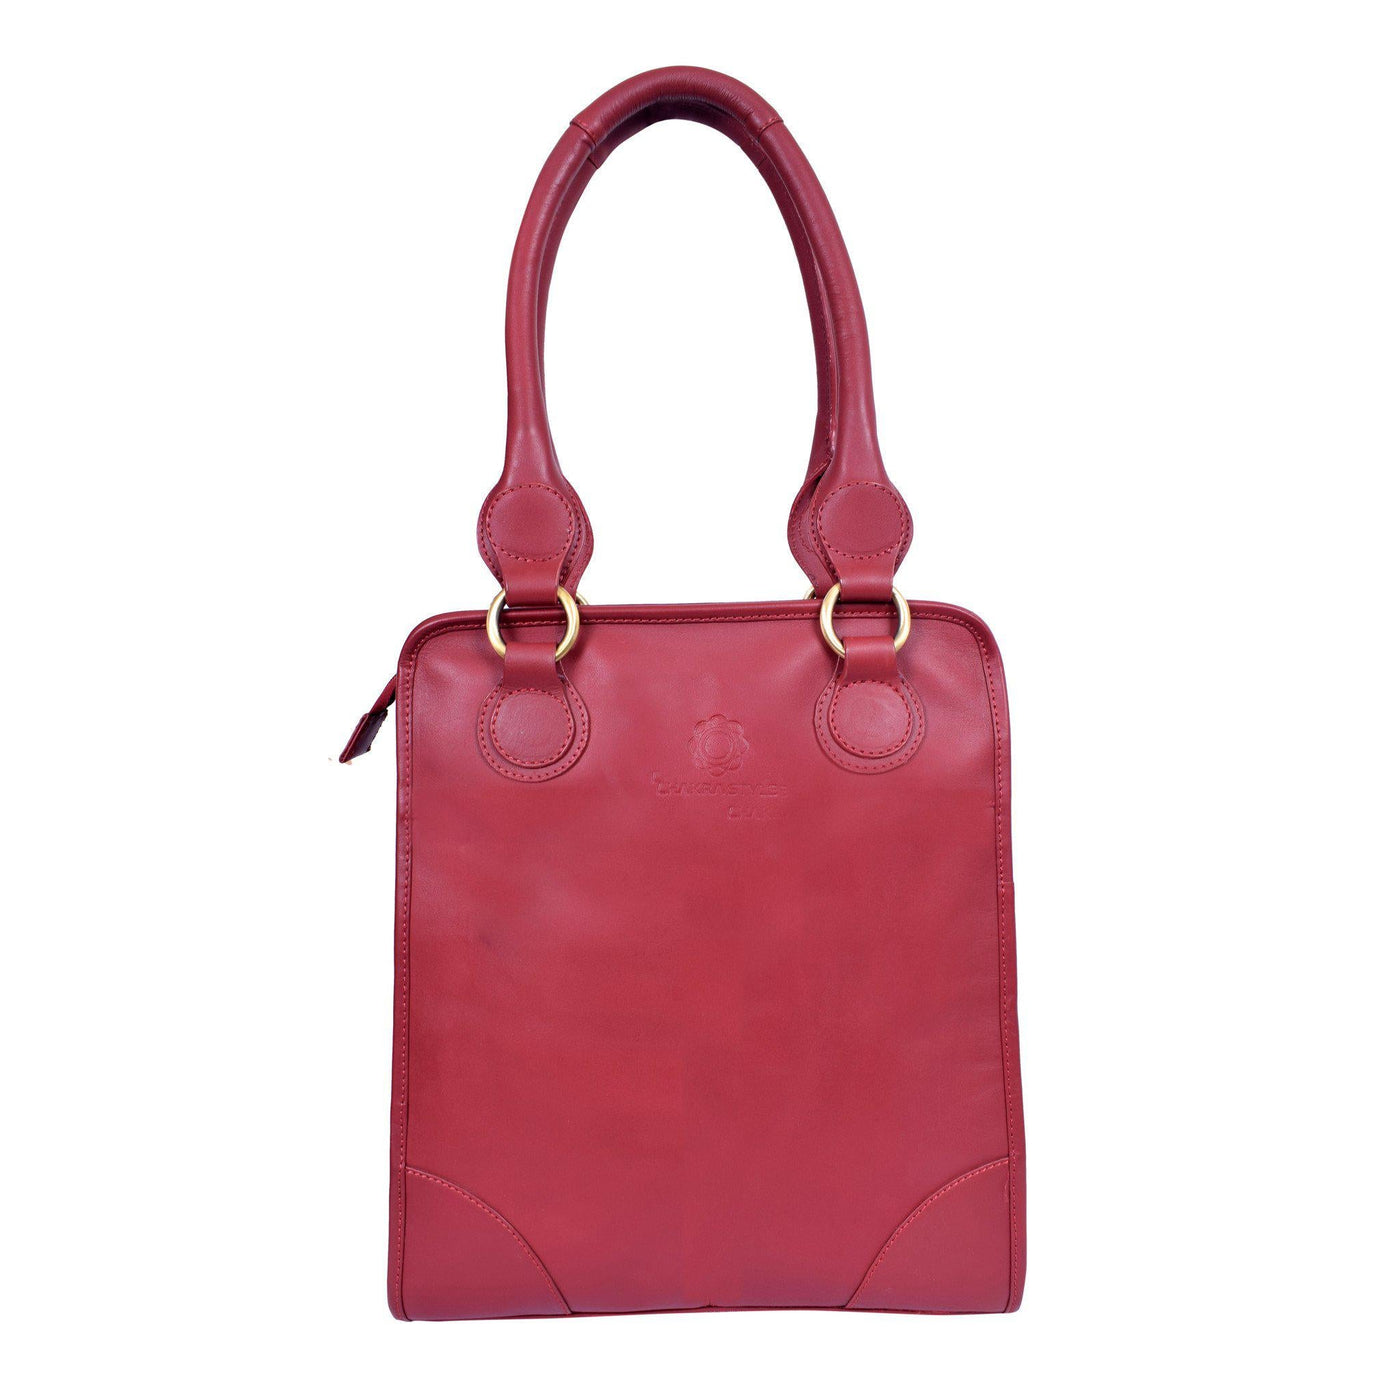 ExionPro Pressed Grain Leather Pink Top Shoulder Carry handbags for women